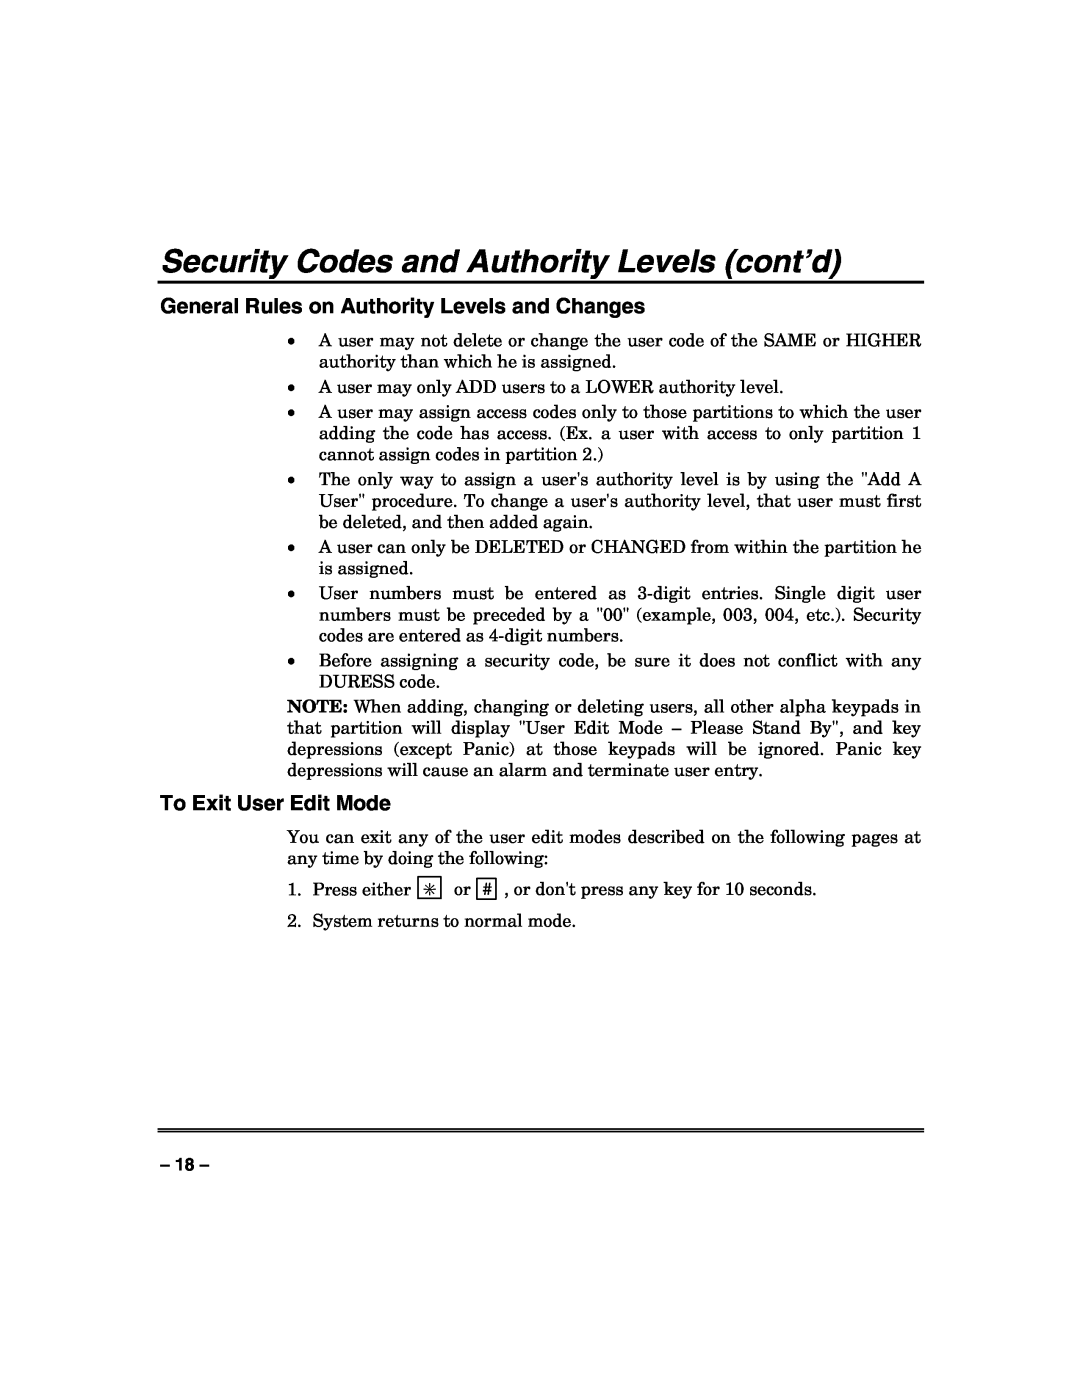 Honeywell VISTA-250FBP, VISTA-128FBP manual General Rules on Authority Levels and Changes, To Exit User Edit Mode 